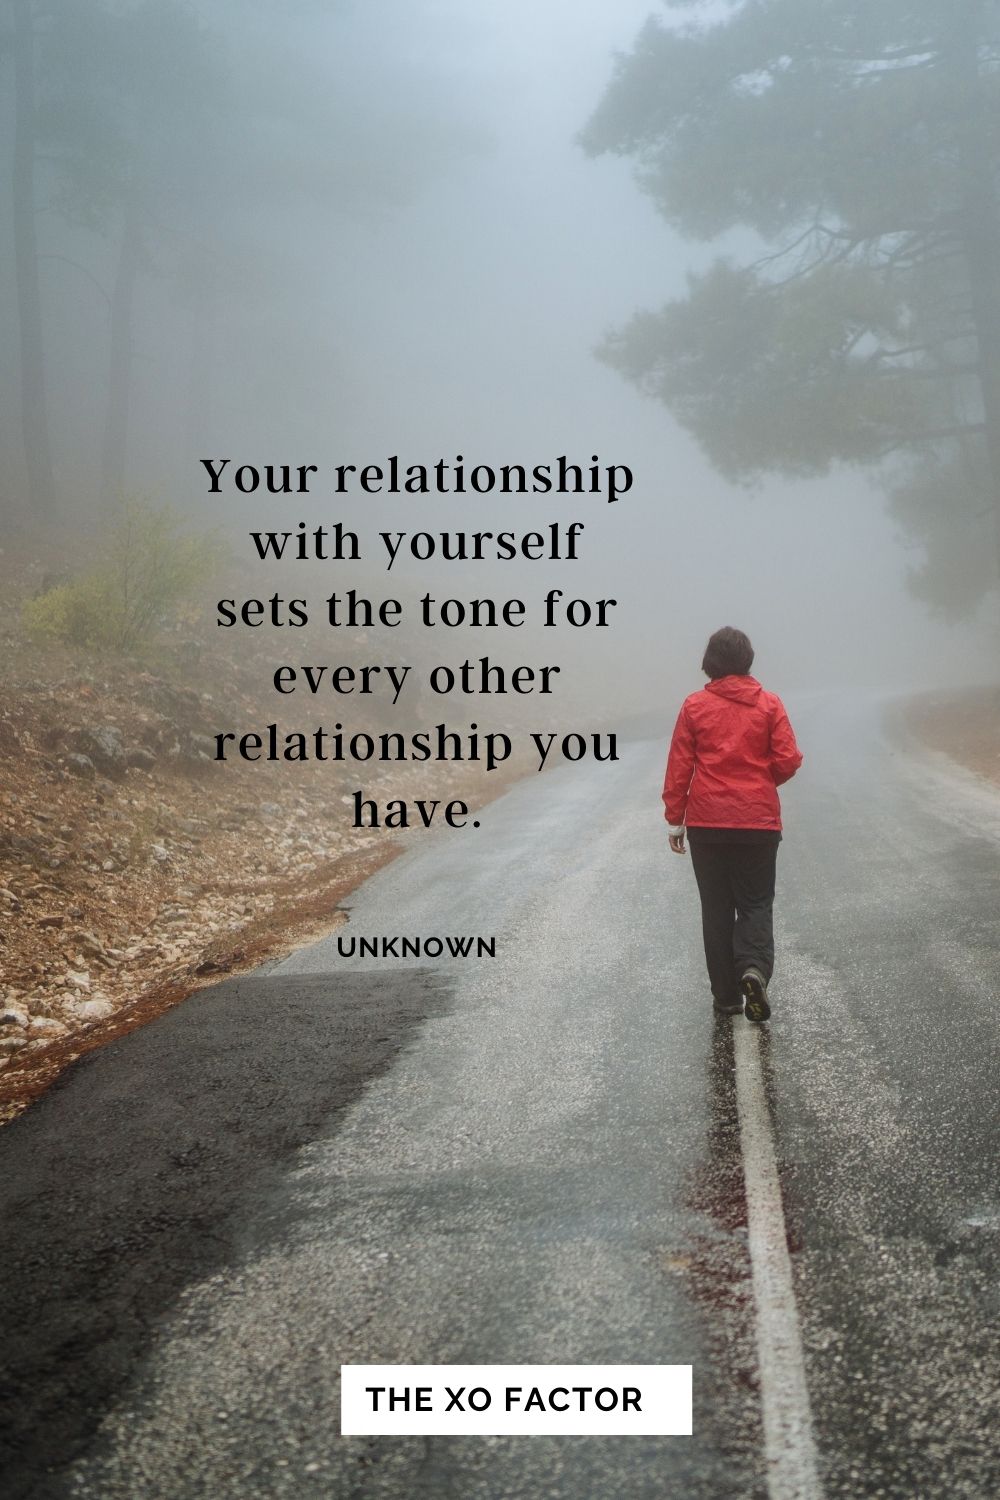 Your relationship with yourself sets the tone for every other relationship you have. Unknown